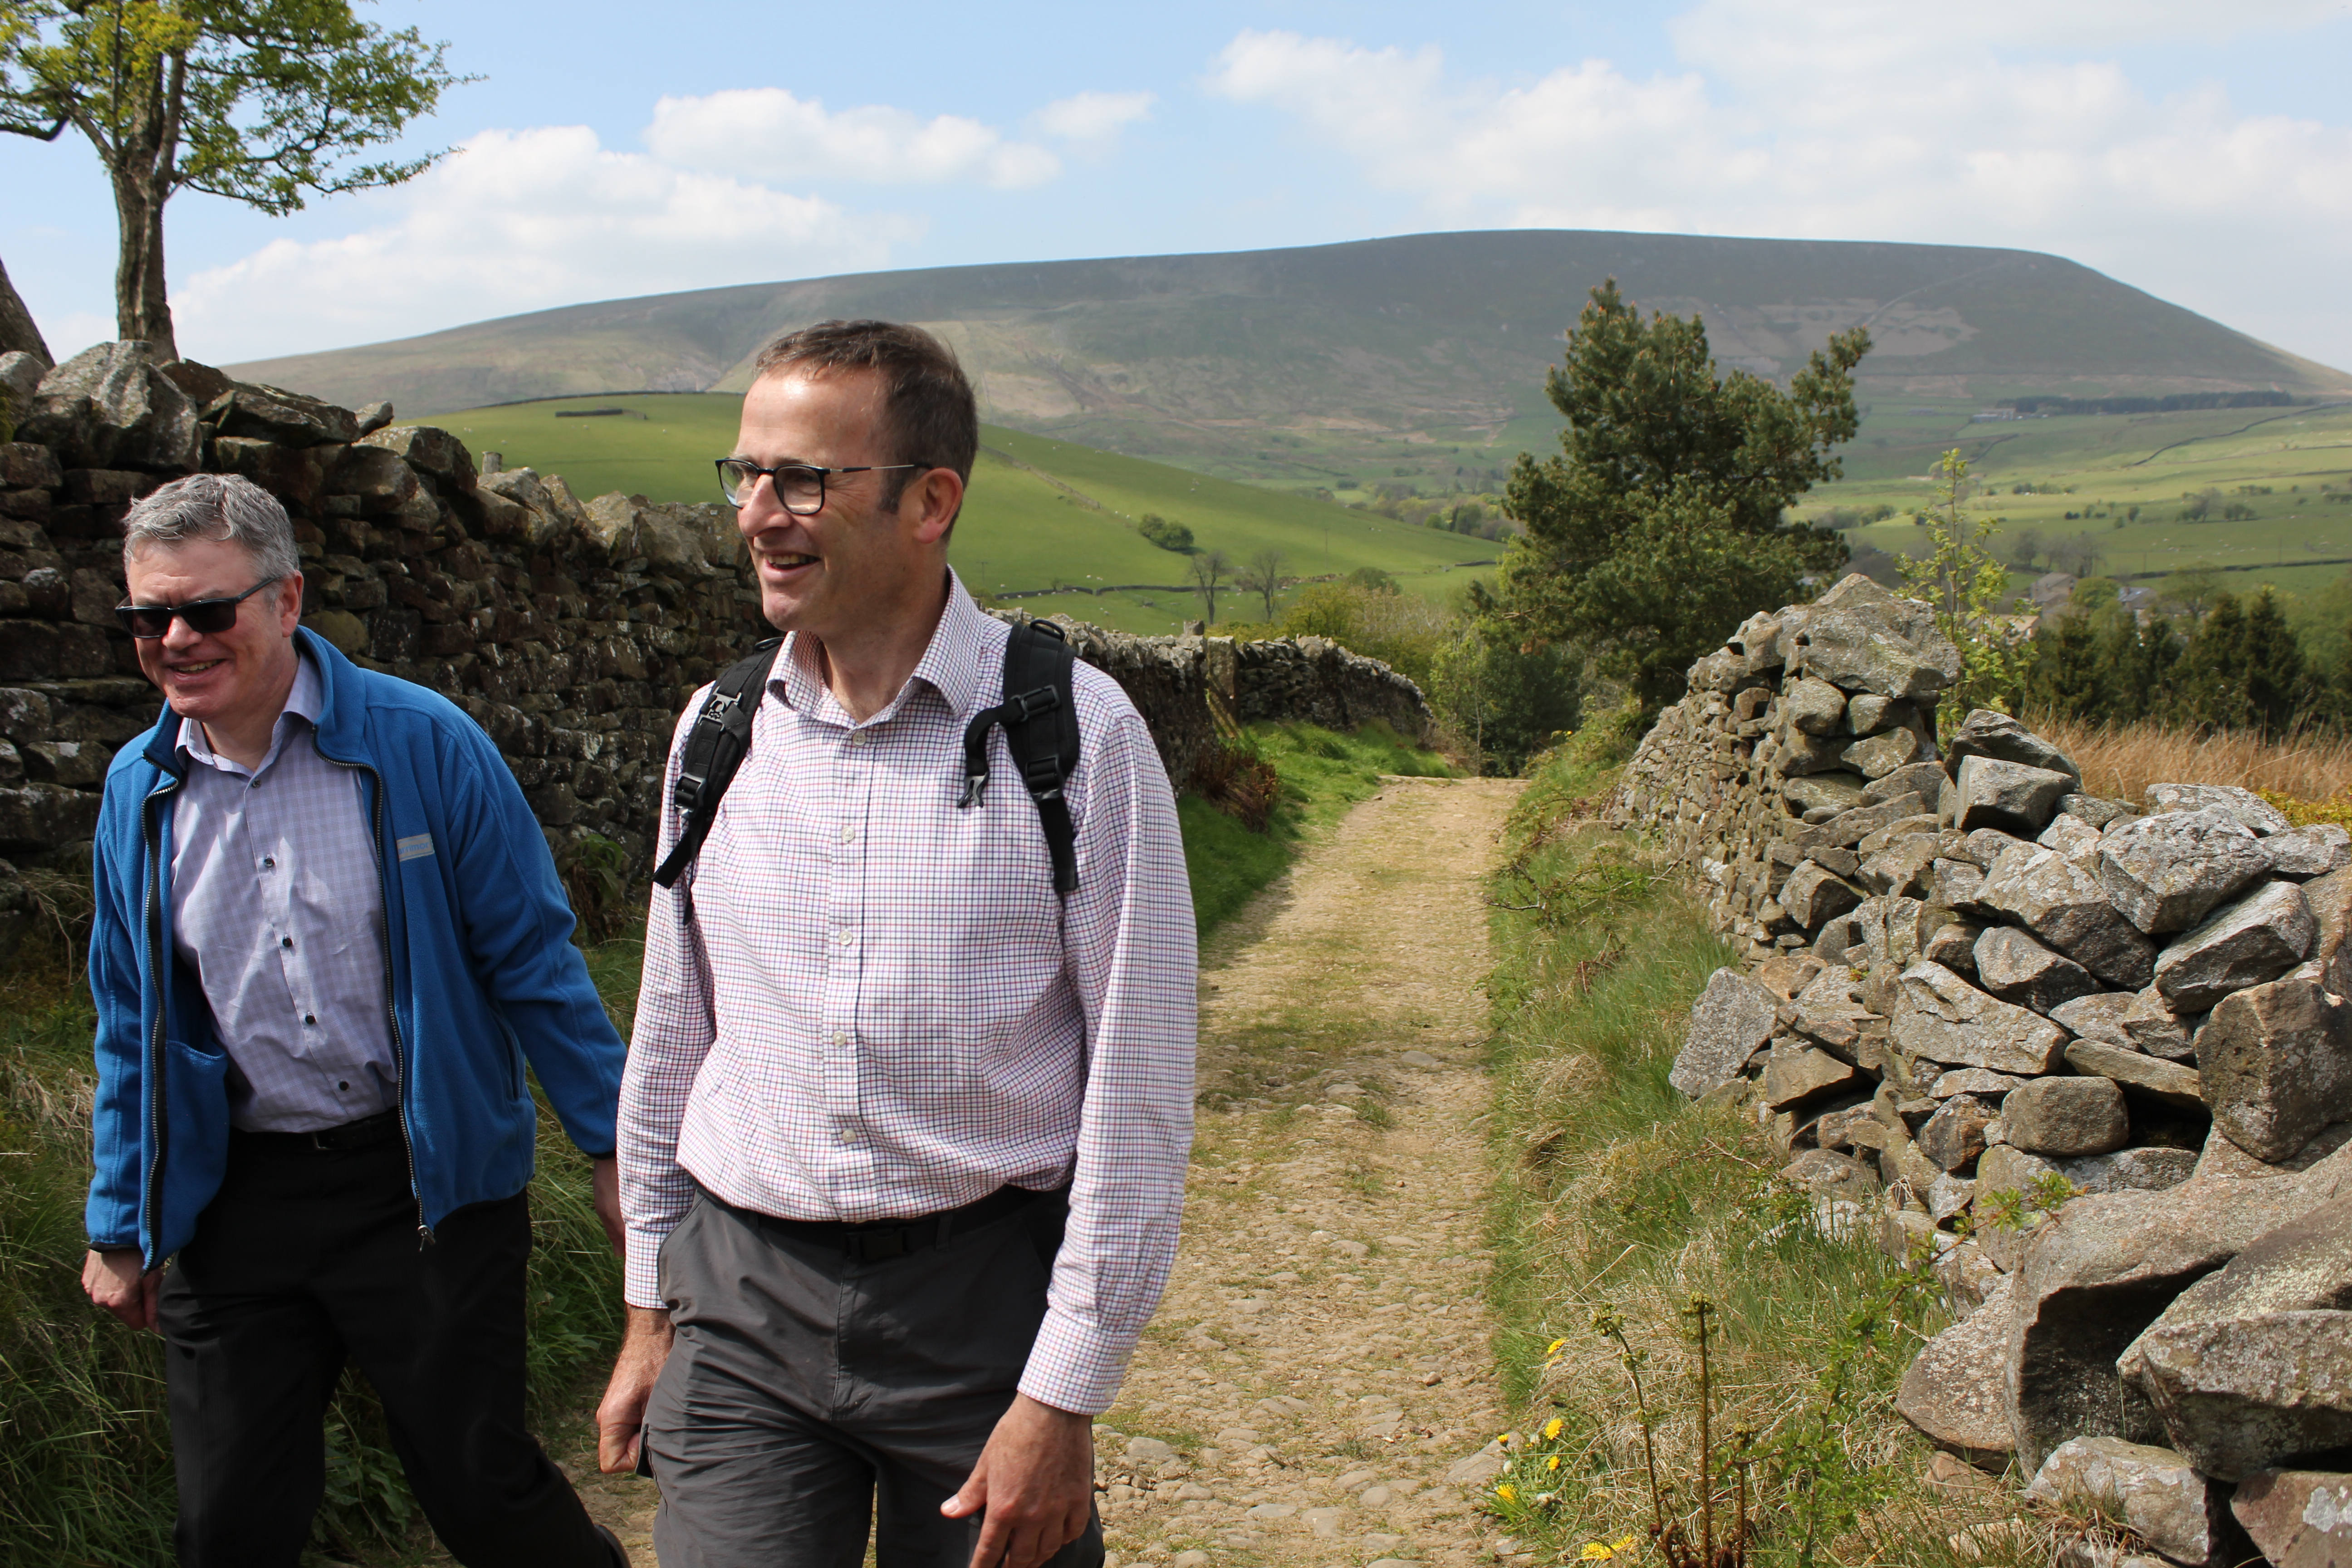 Walking in Pendle is amazing – it’s crystal clear!